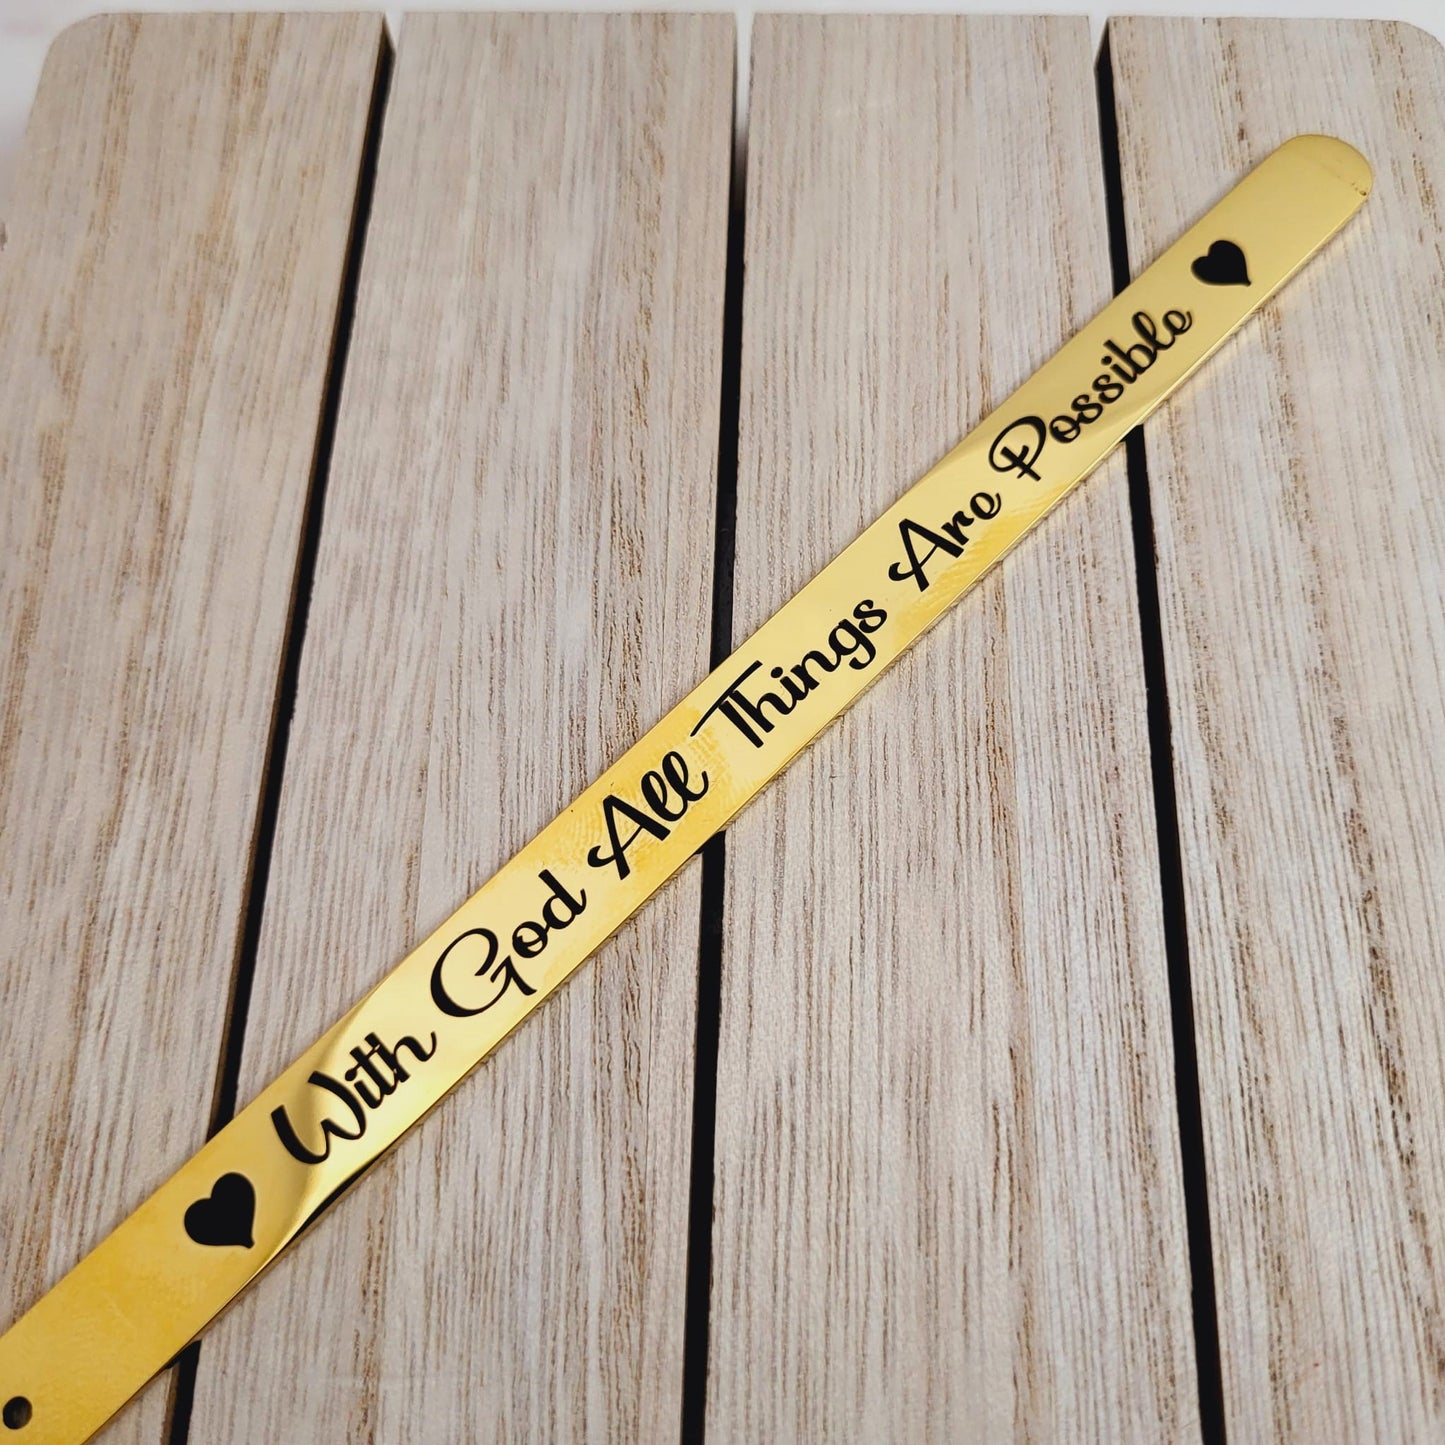 With God all things are possible - Bible verse Bookmarks